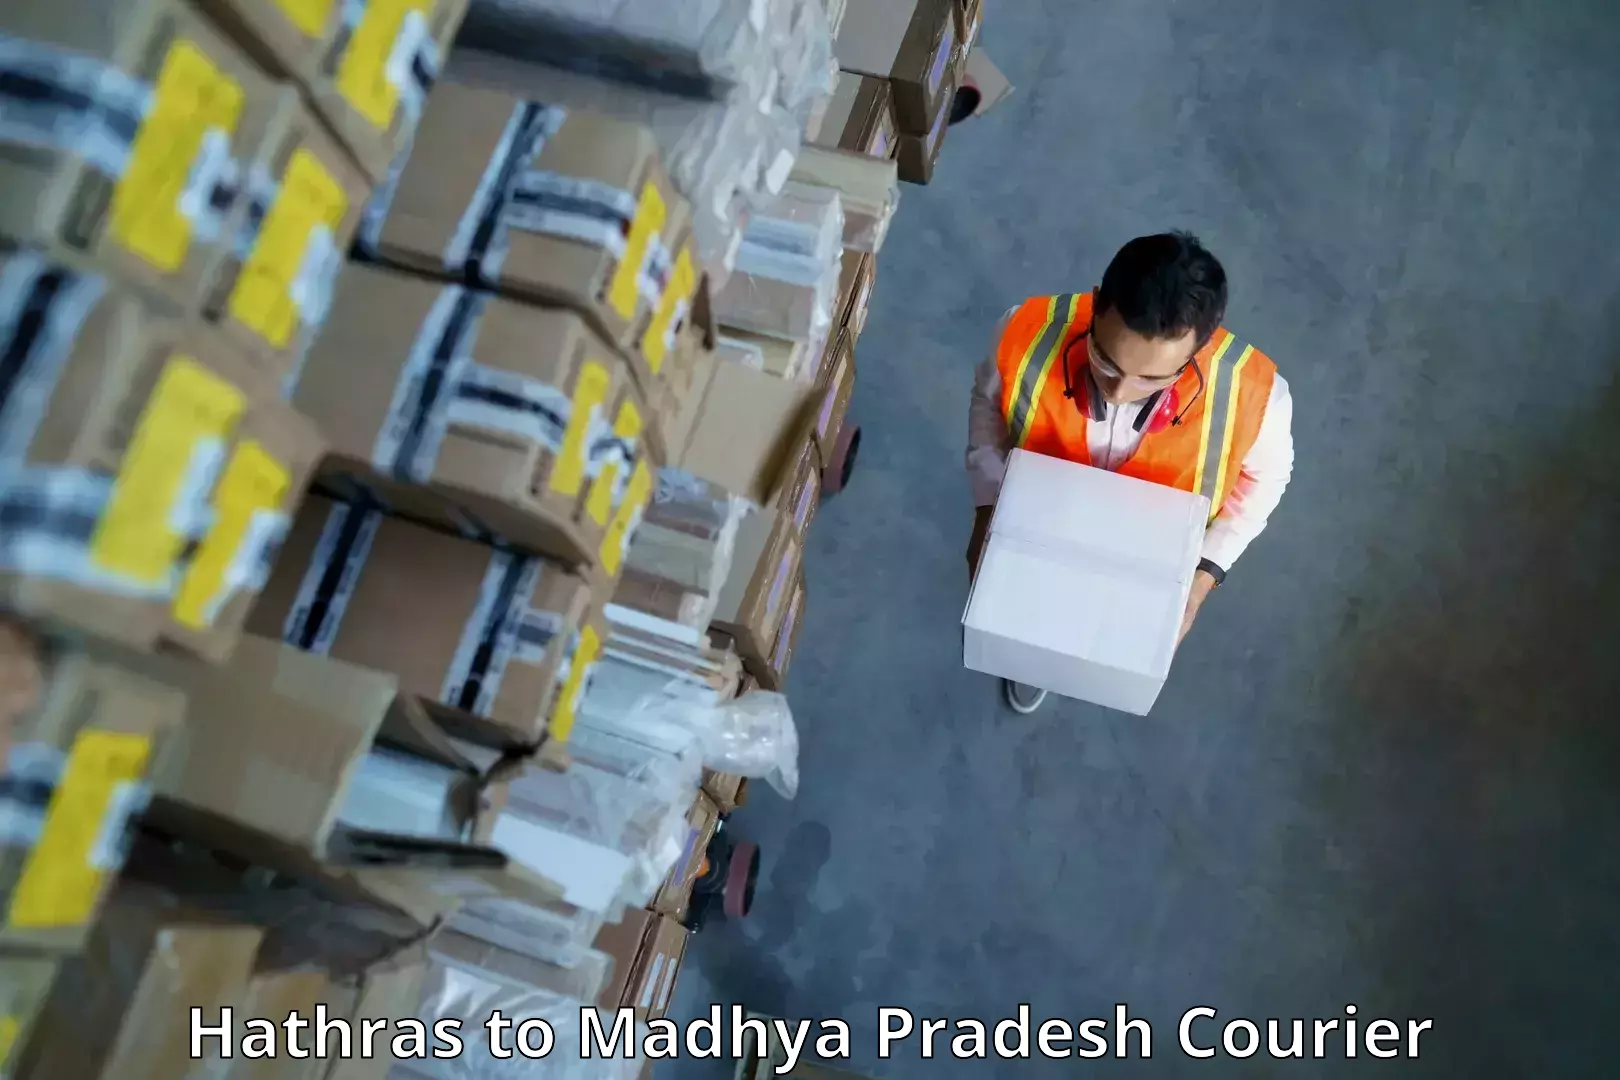 Large-scale shipping solutions Hathras to Rampur Naikin